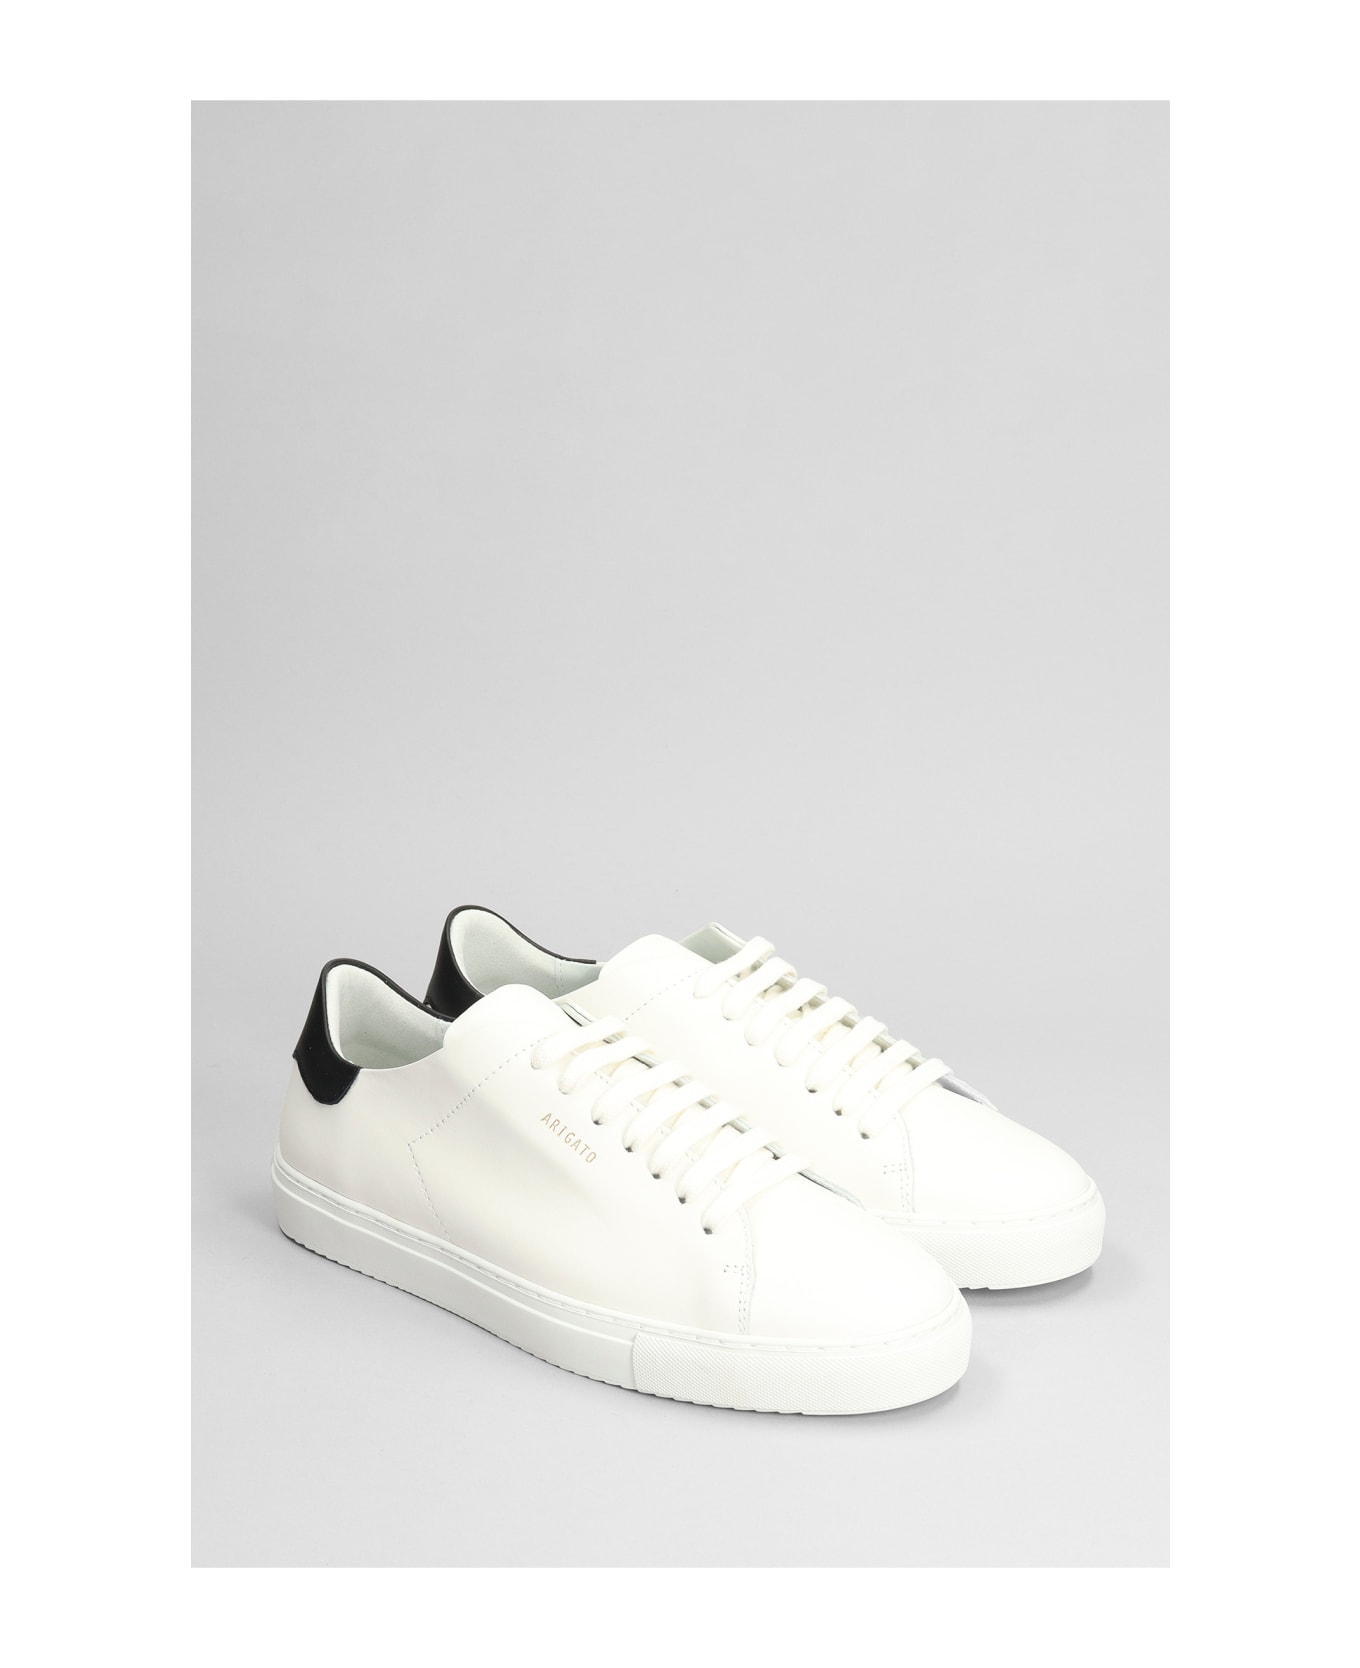 Axel Arigato Clean 90 Sneakers In White Leather - white スニーカー